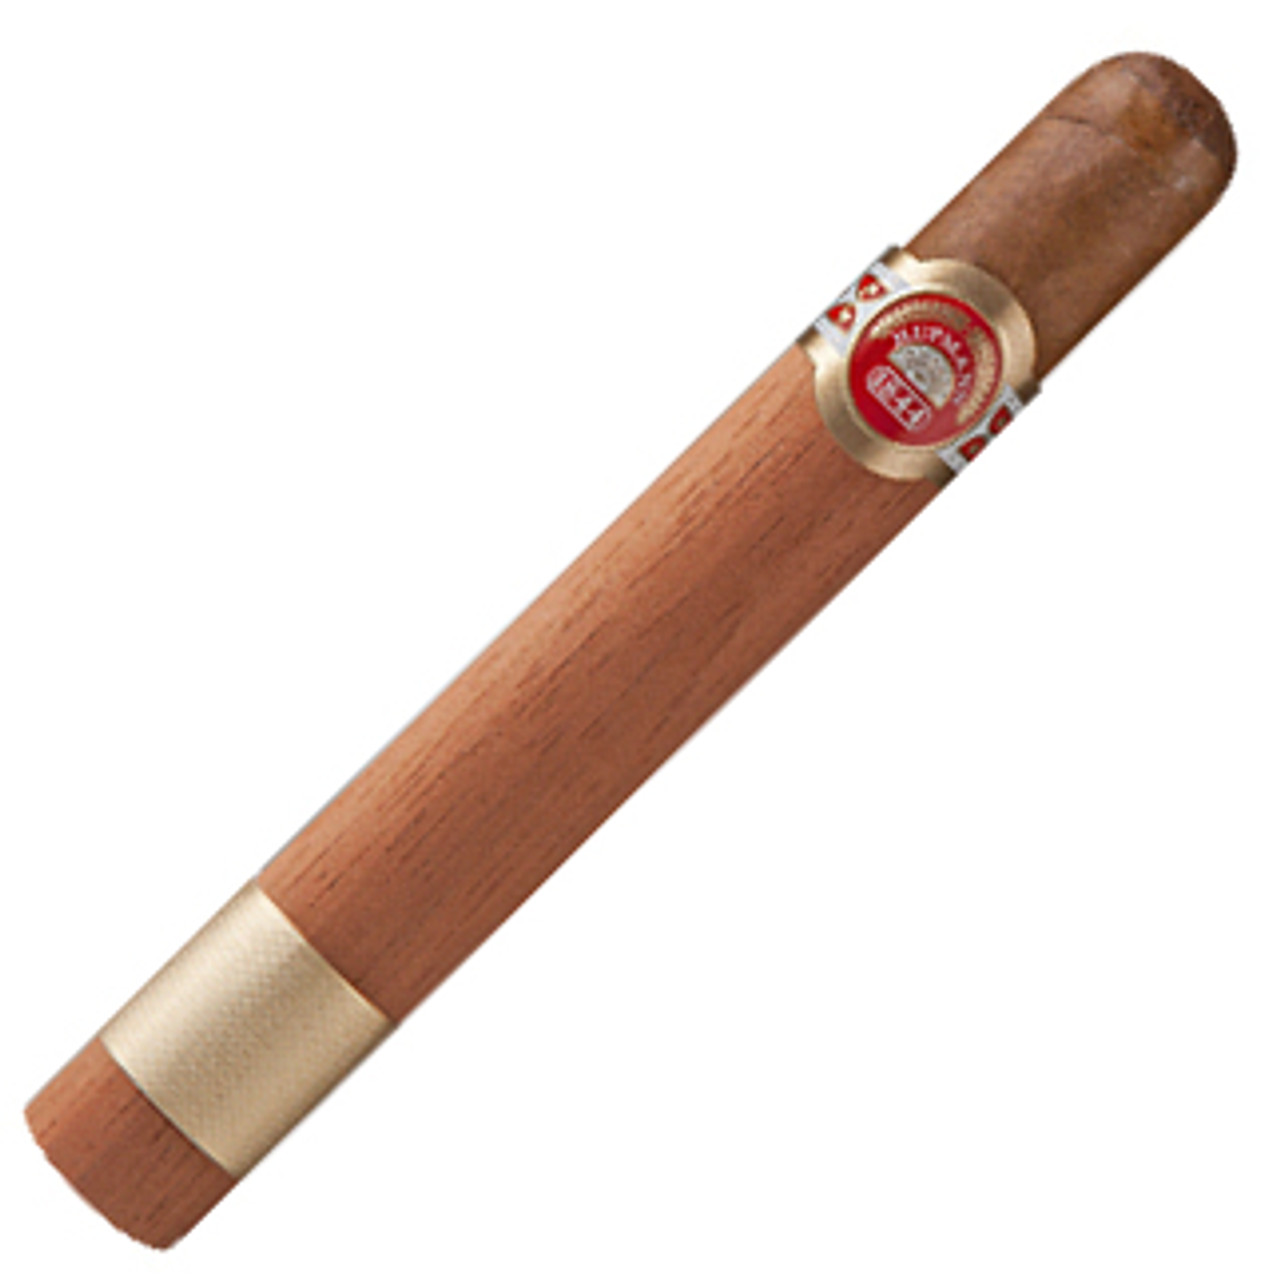 H. Upmann Special Seleccion New Yorker Cigars - 5.5 x 44 (Box of 25)